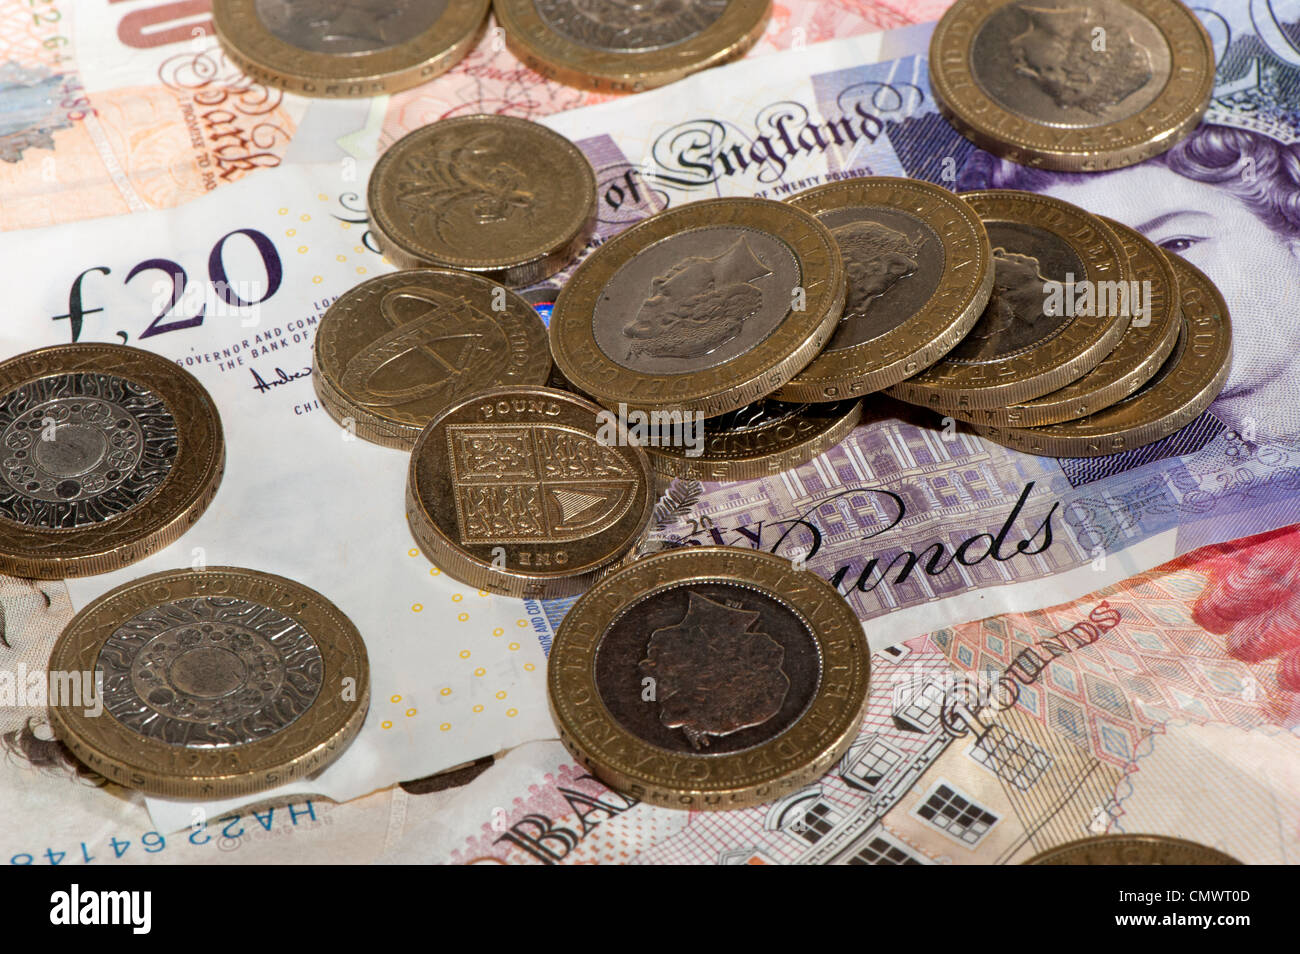 Bank notes and coins of different denominations. British Sterling currency. Stock Photo